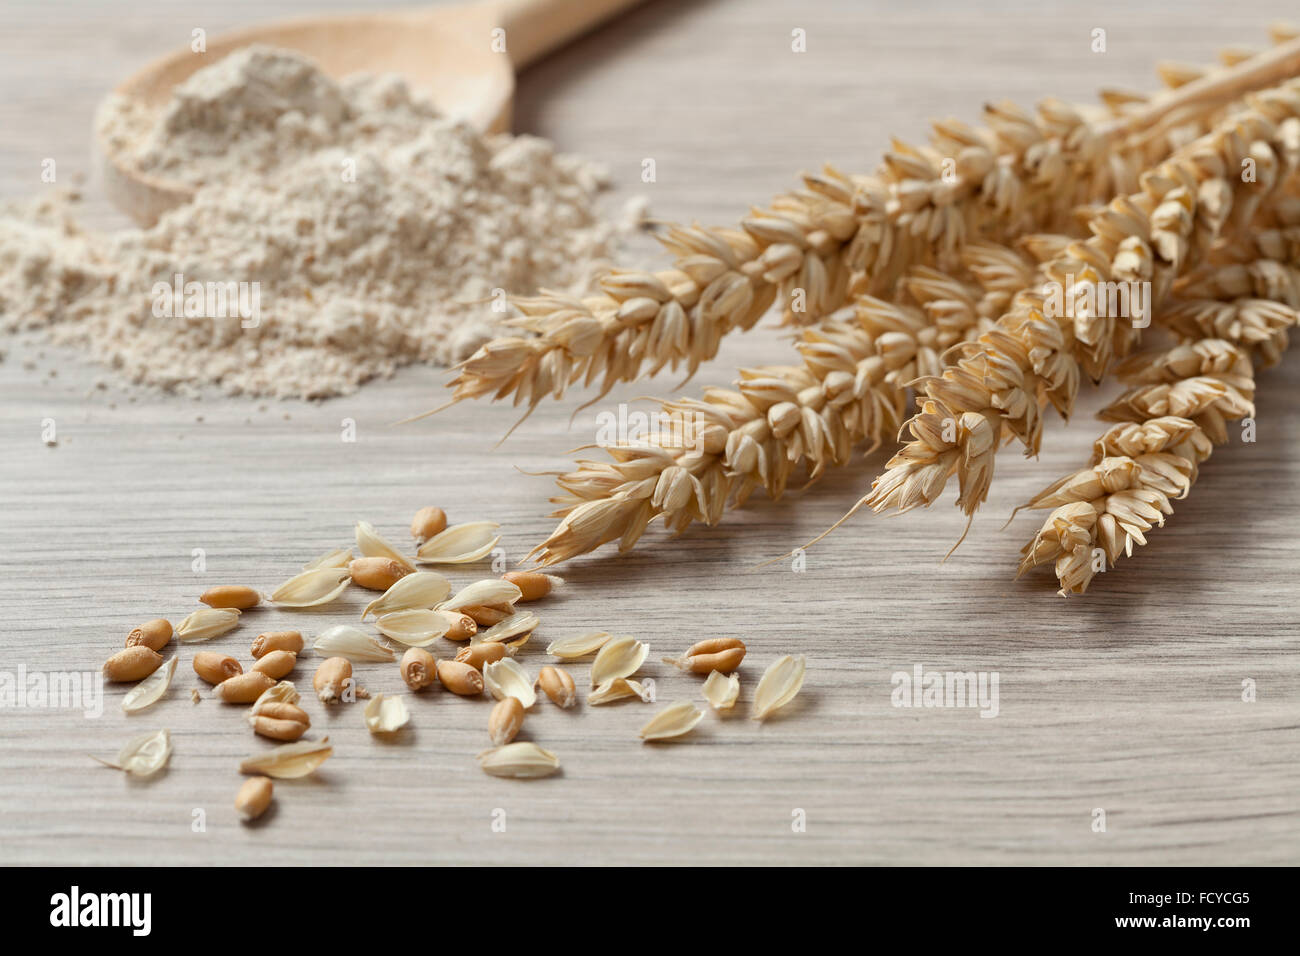 Dried wheat, seeds and flour close up Stock Photo